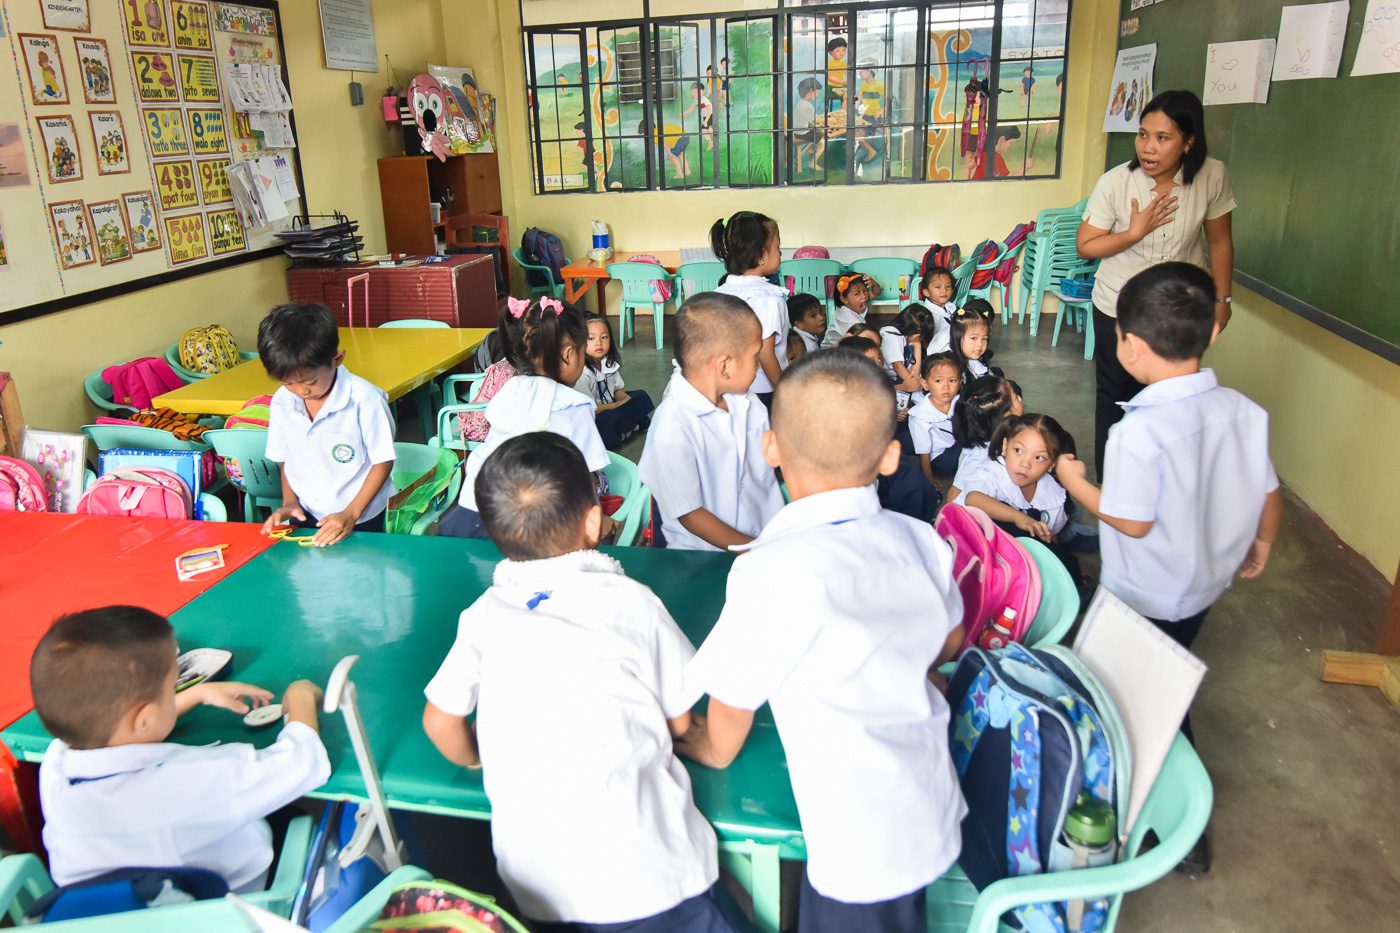 Amid ‘teacher shaming,’ DepEd says PTAs proper forum to resolve conflicts